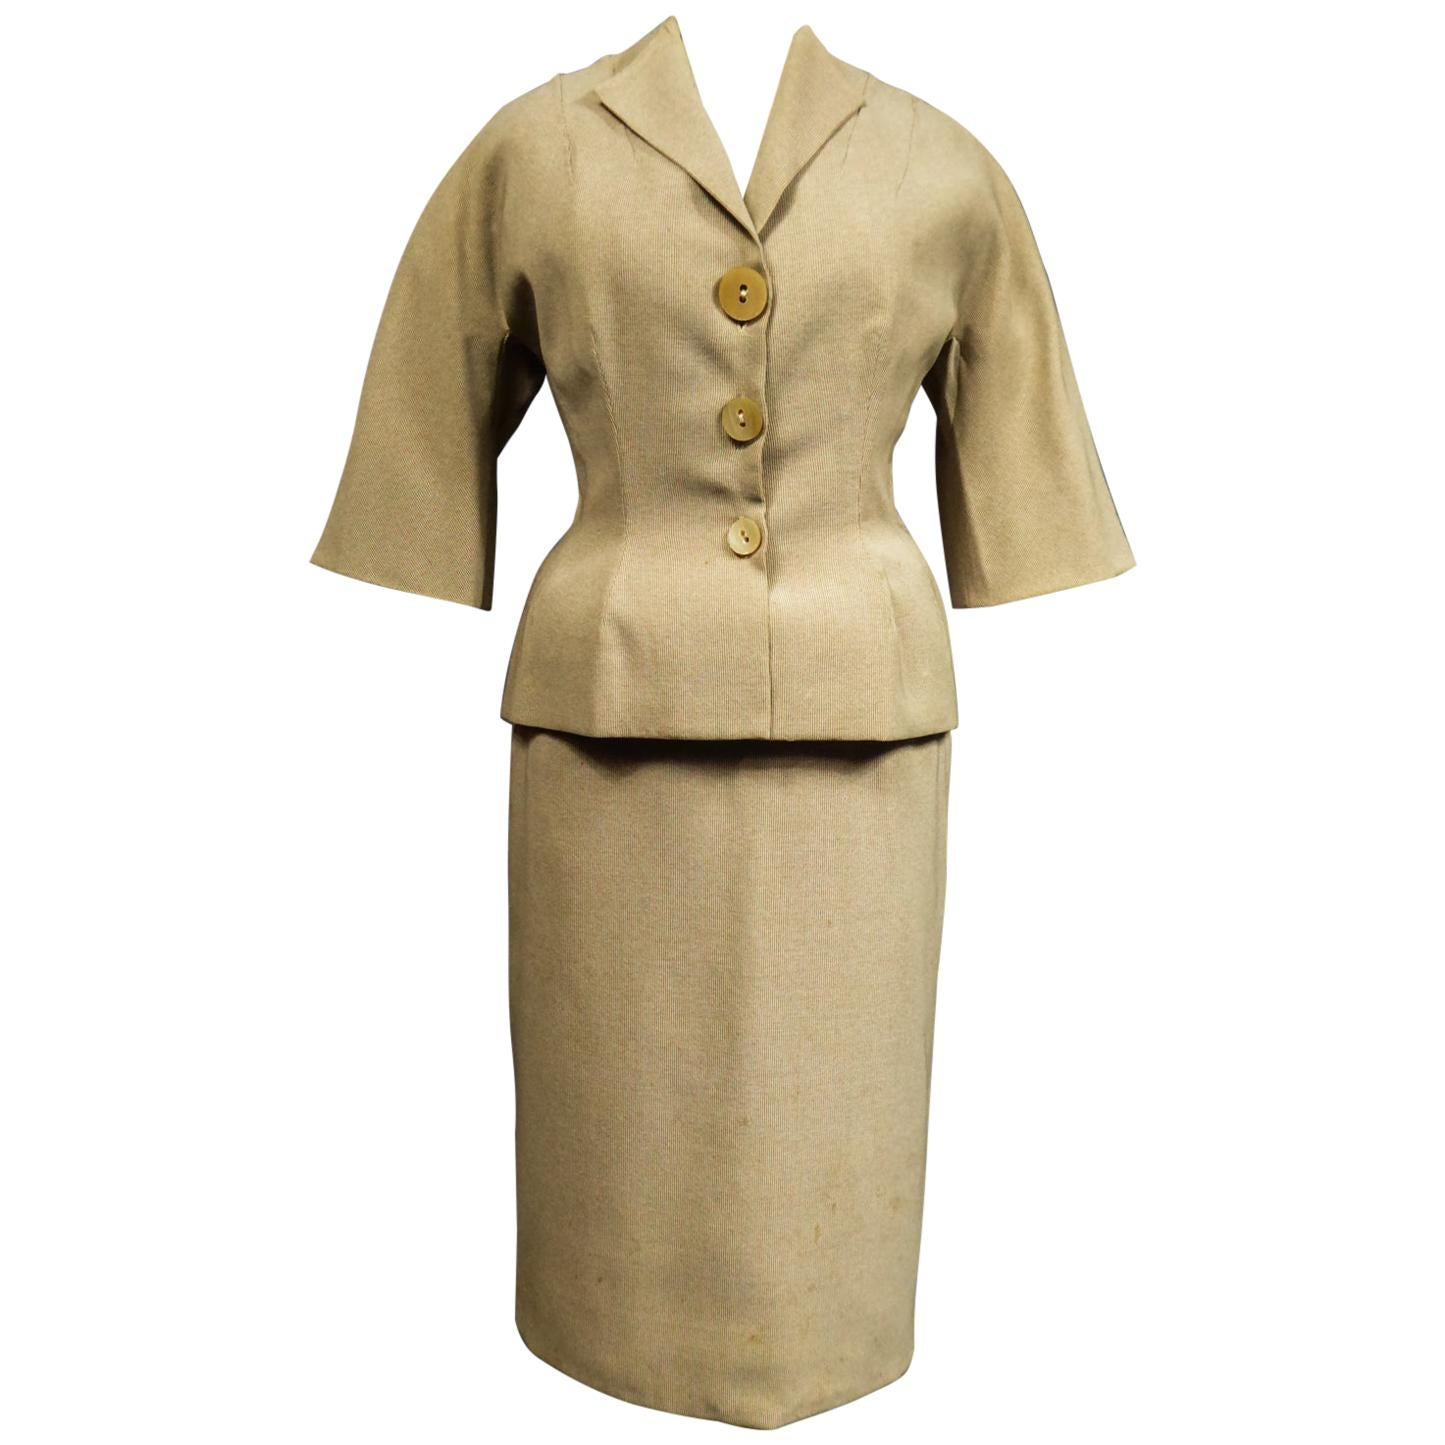 A Marcel Rochas French Couture Woollen Skirt and Jacket Bar Set Circa 1948